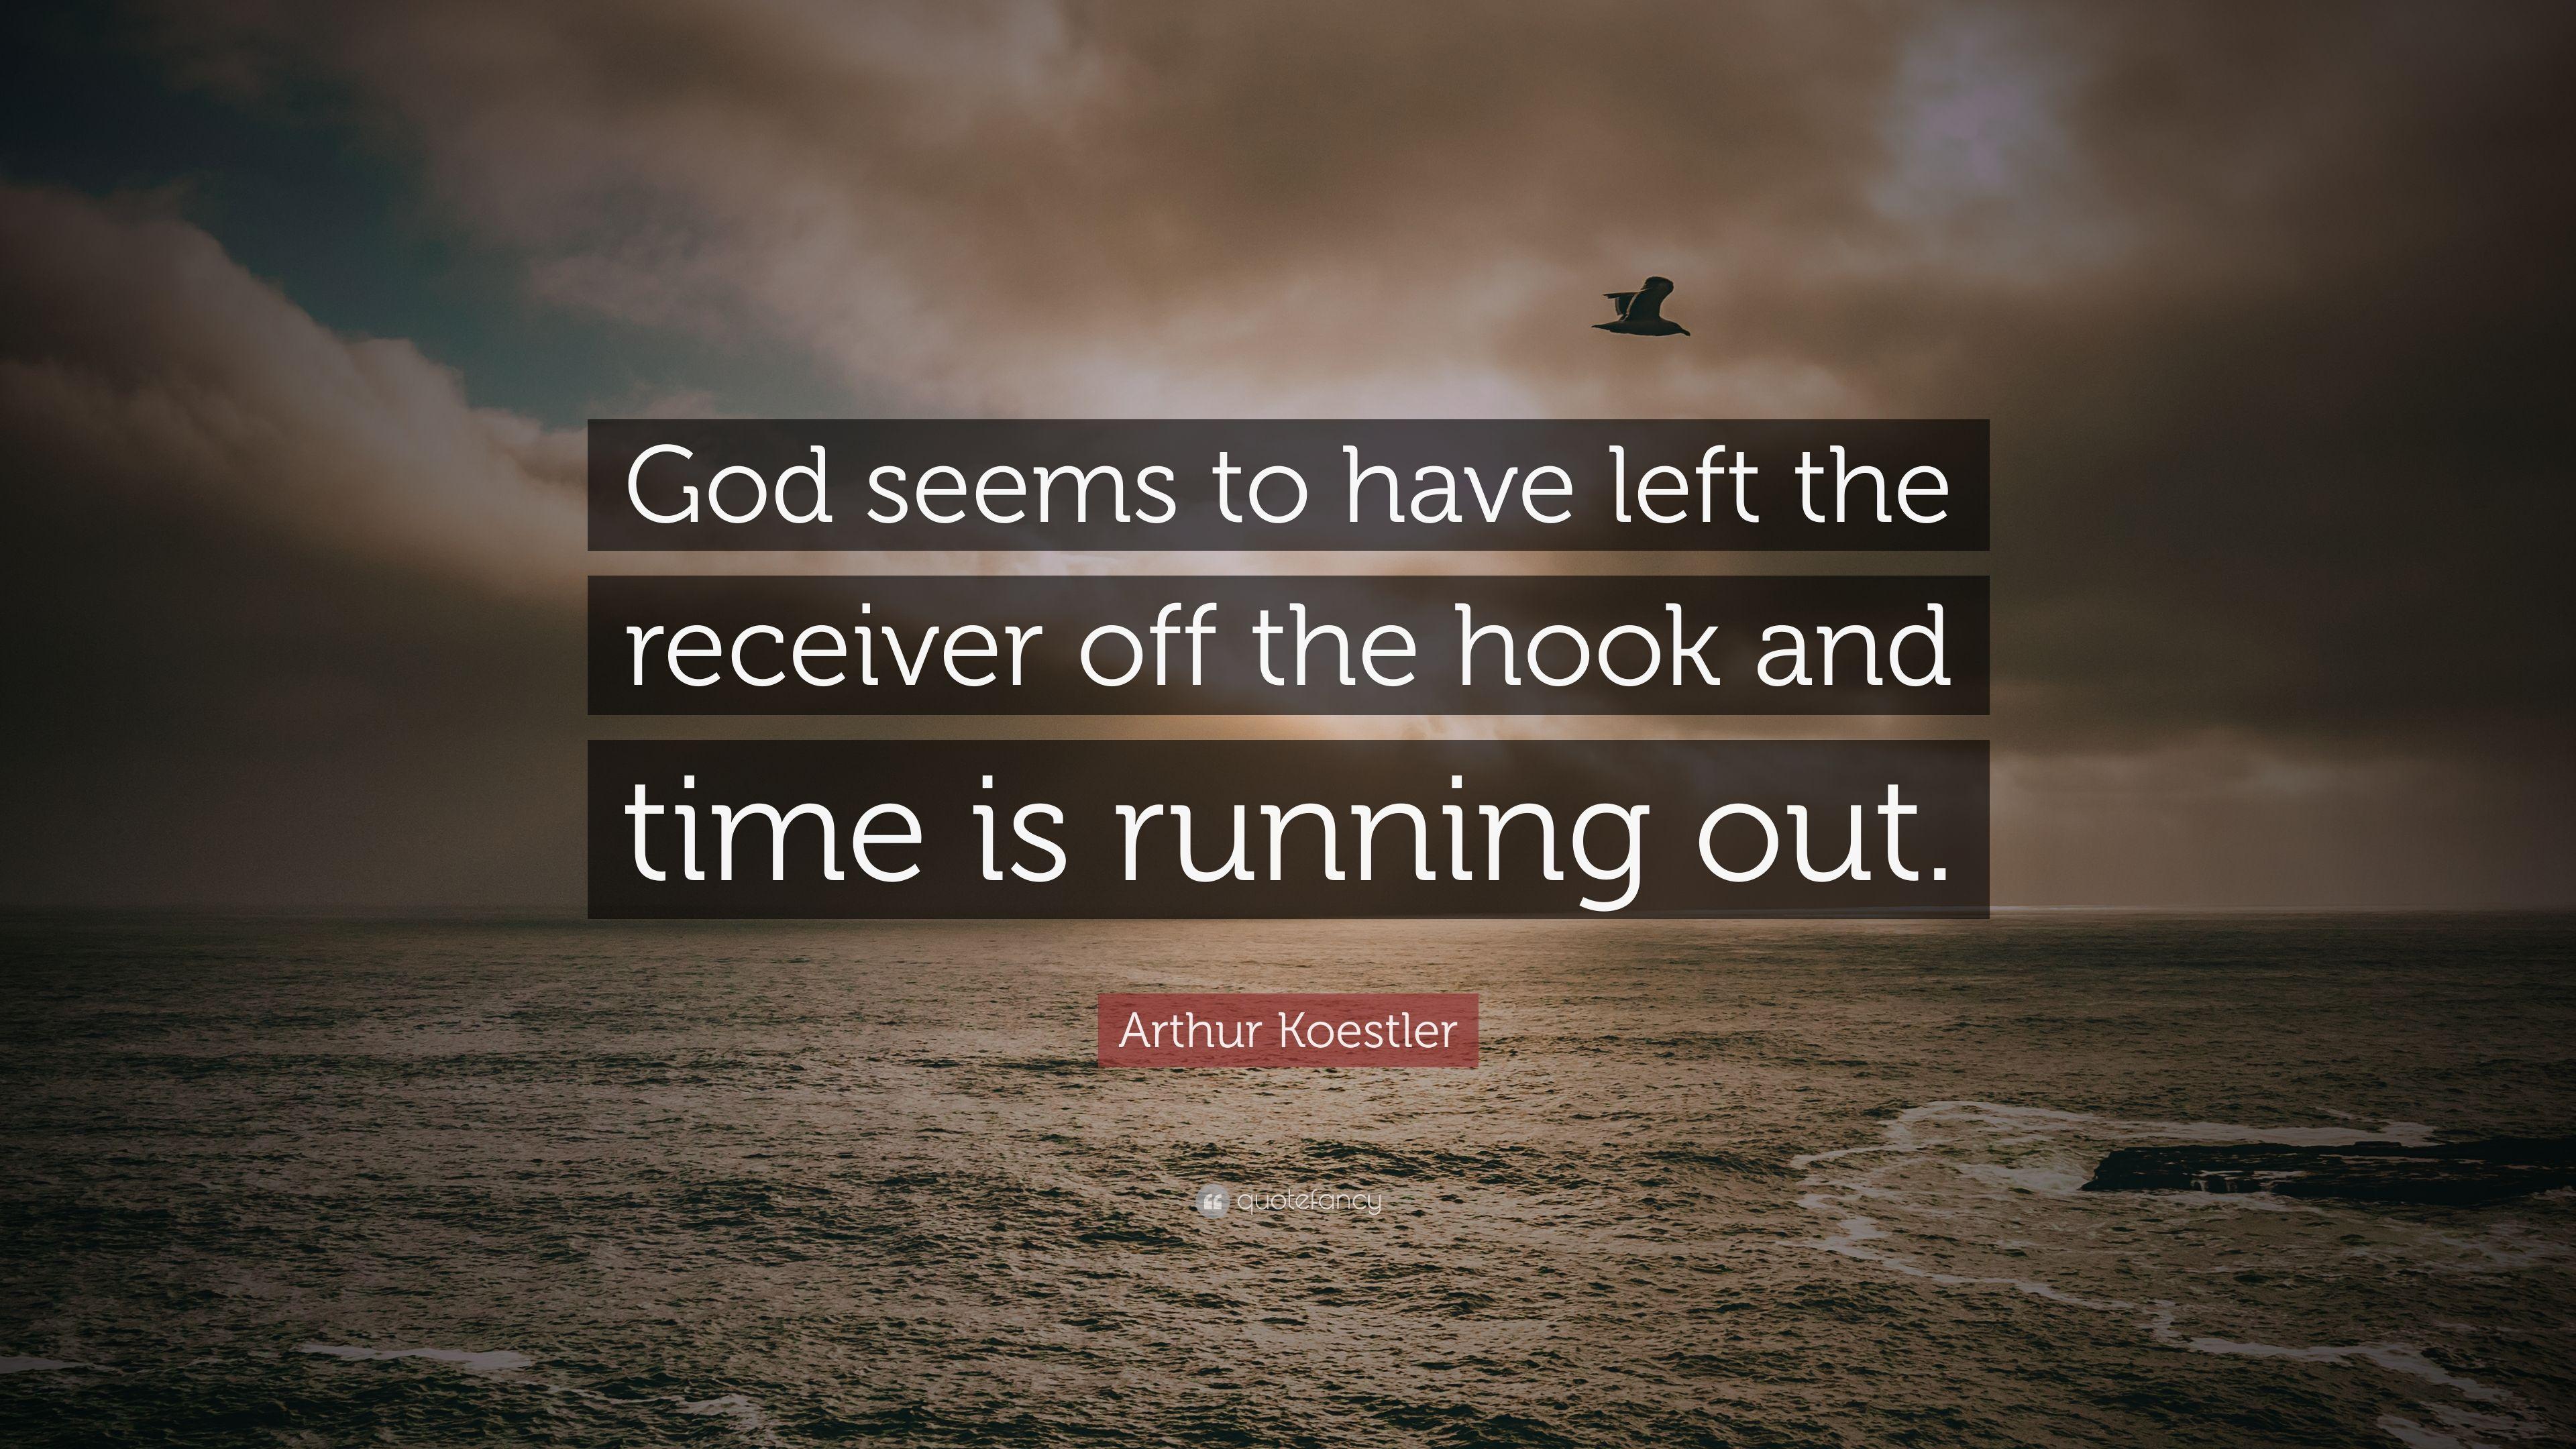 Arthur Koestler Quote: "God seems to have left the receiver 